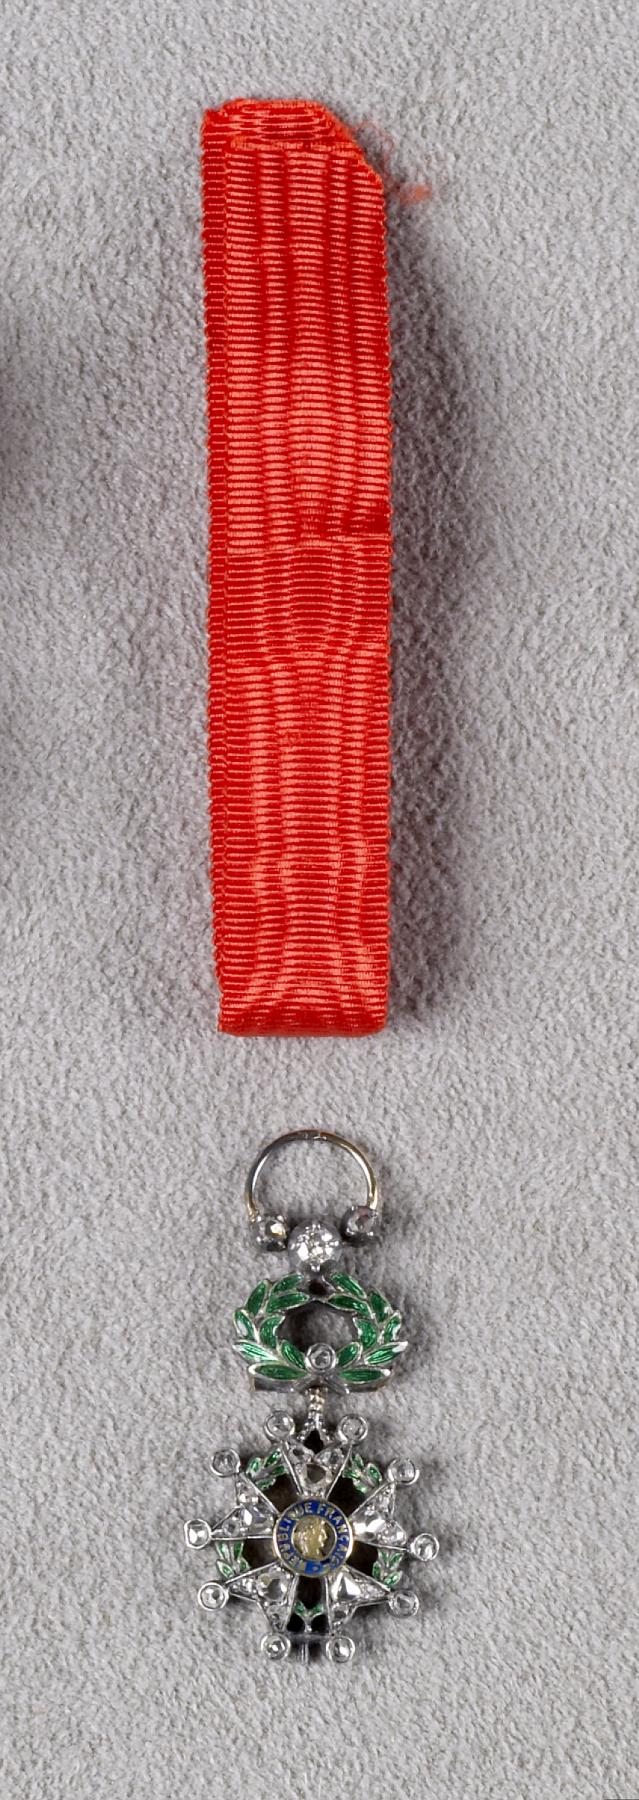 Image for Ribbon from Small Legion of Honor Medal